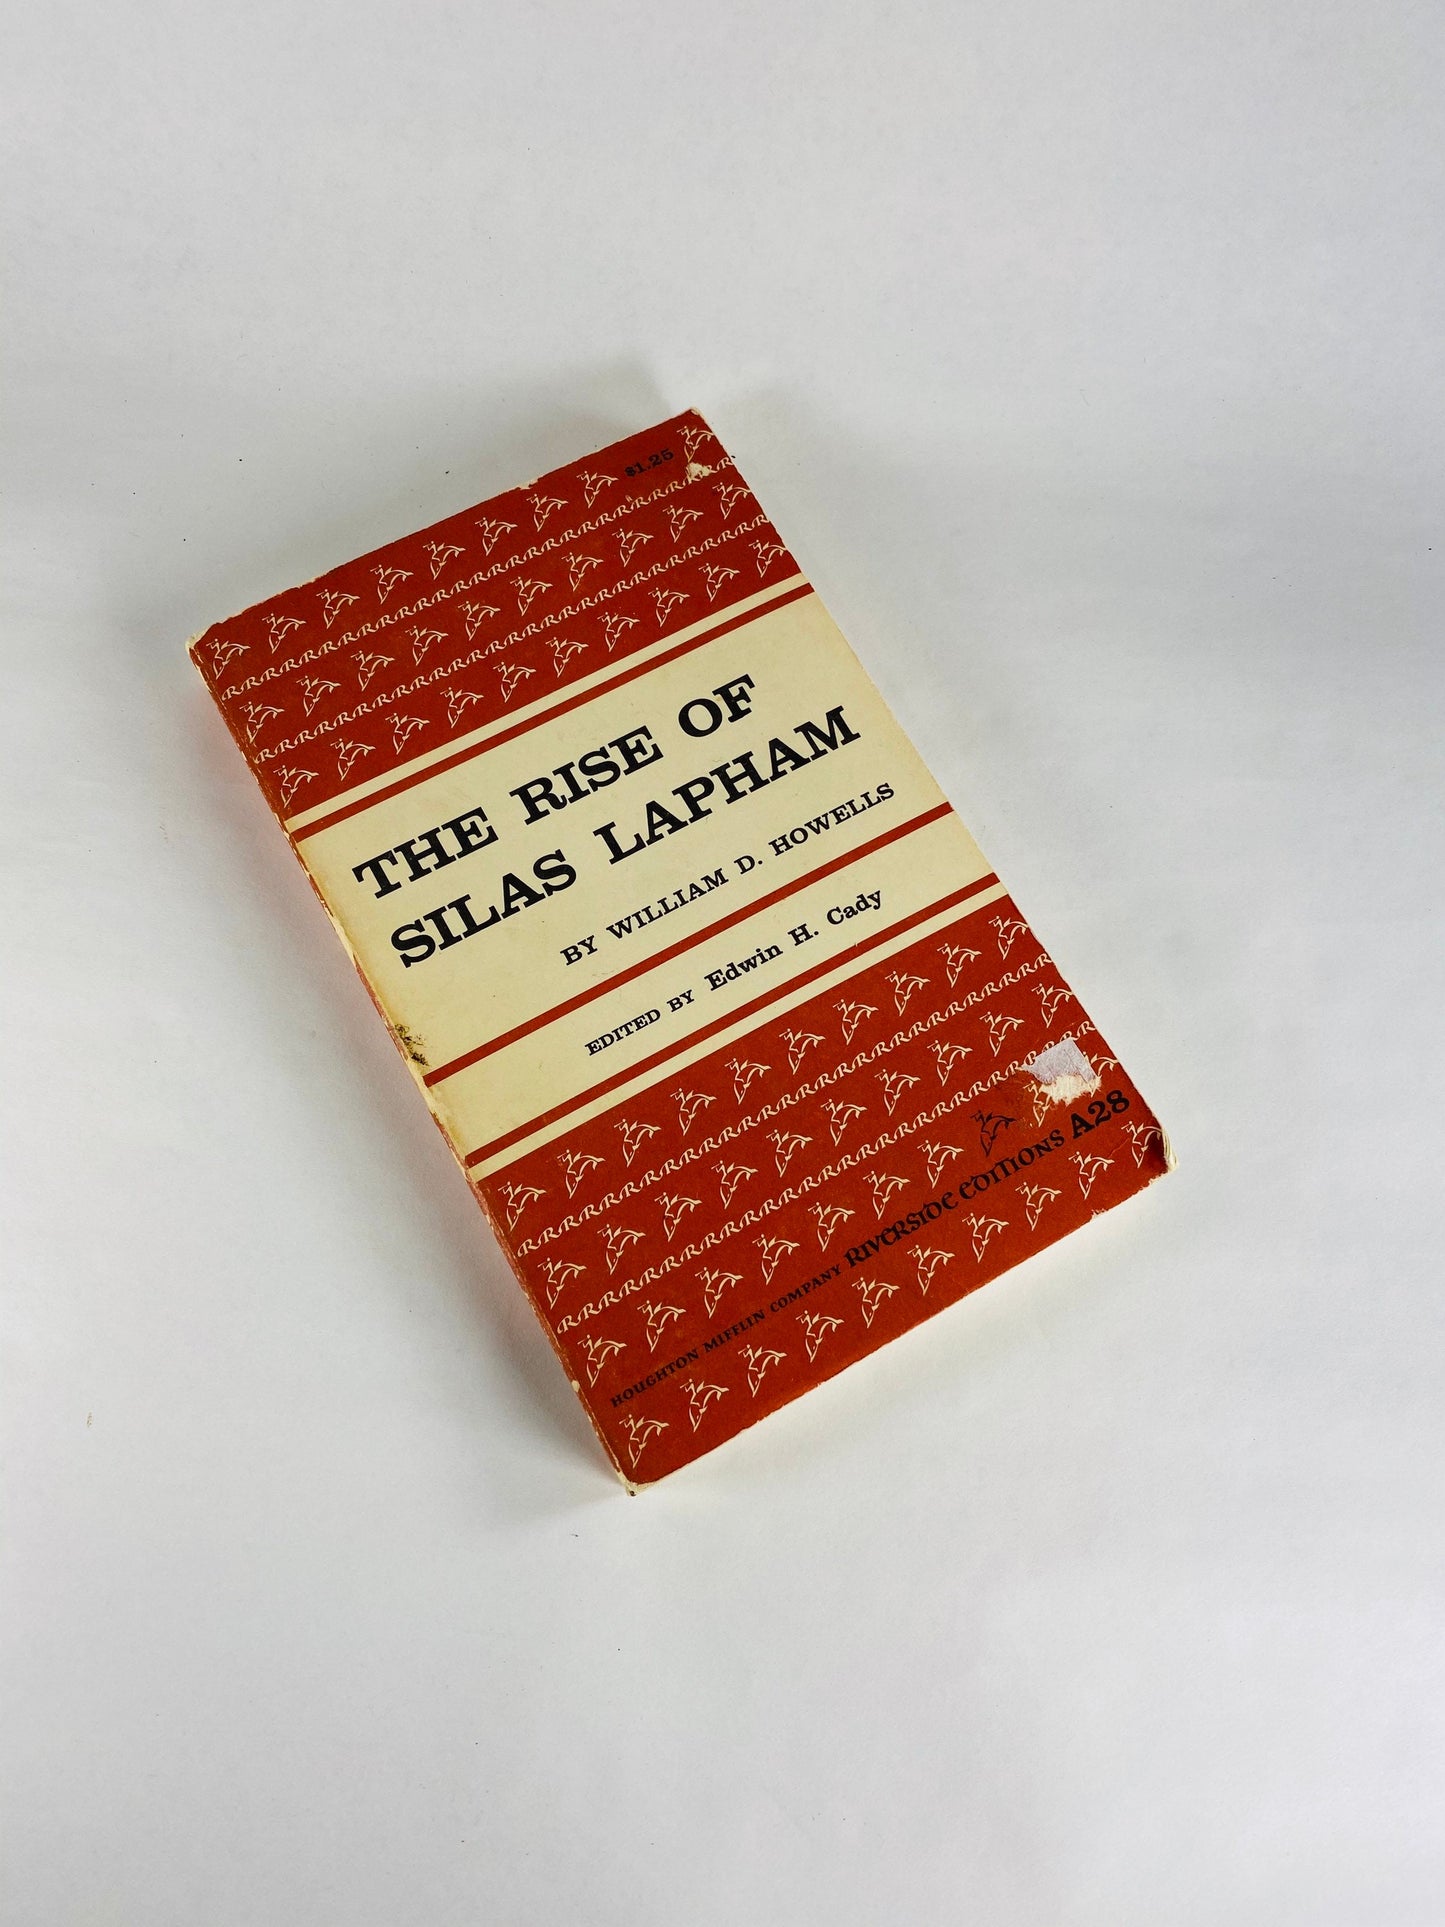 1957 Rise of Silas Lapham by William Howells Vintage Riverside paperback book about a self-made millionaire in Boston during the Gilded Age